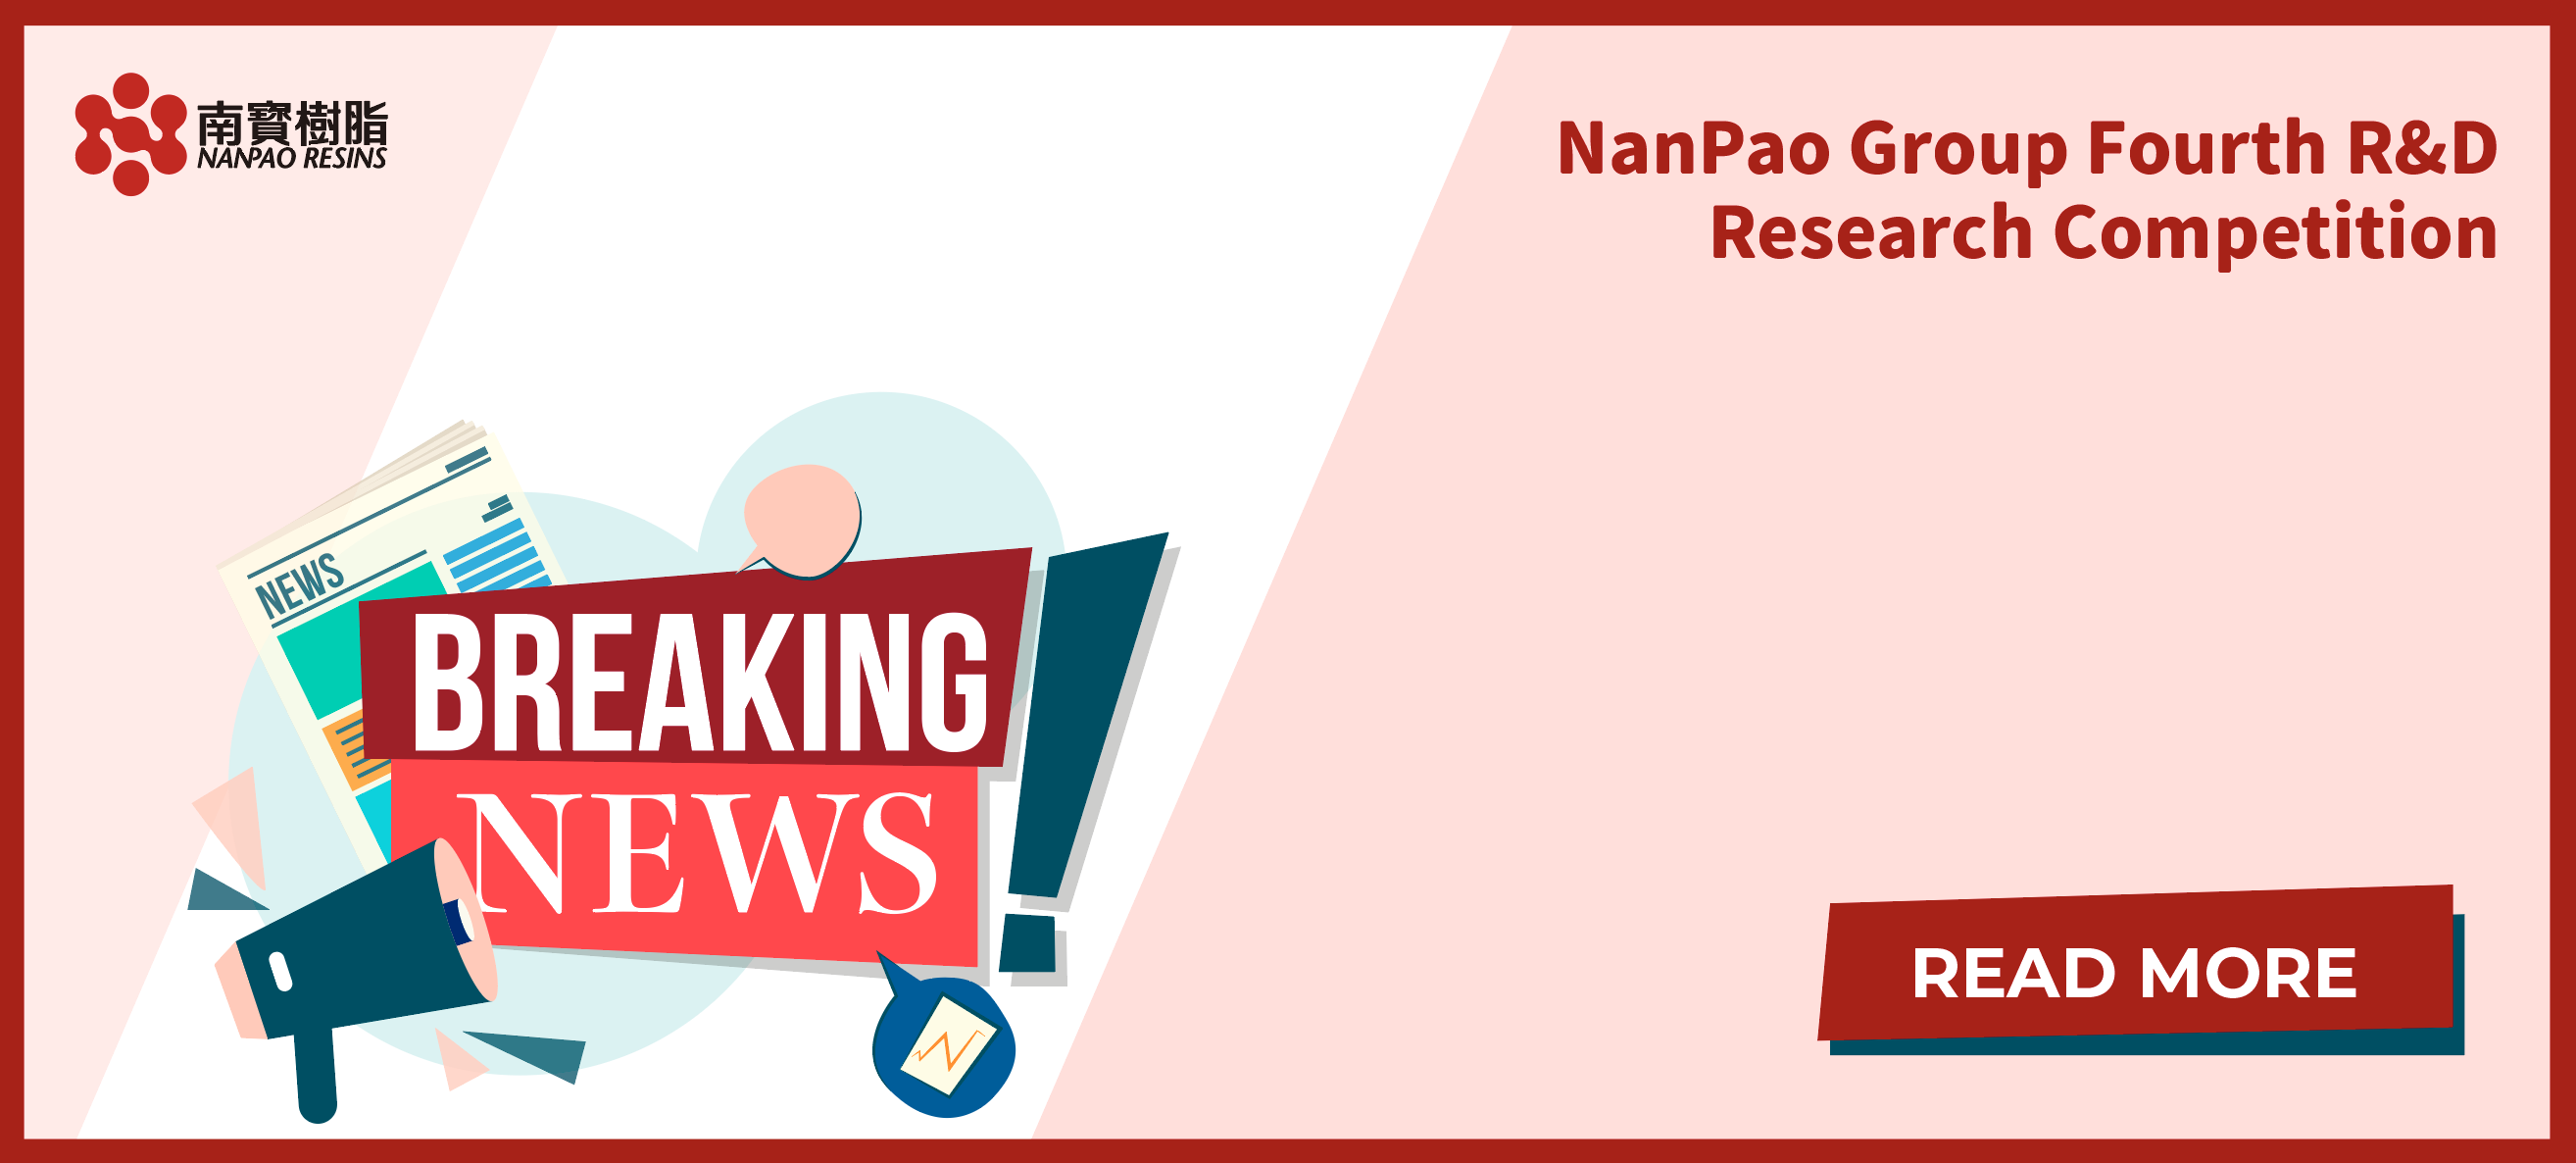 NanPao Group Fourth R&D Research Competition